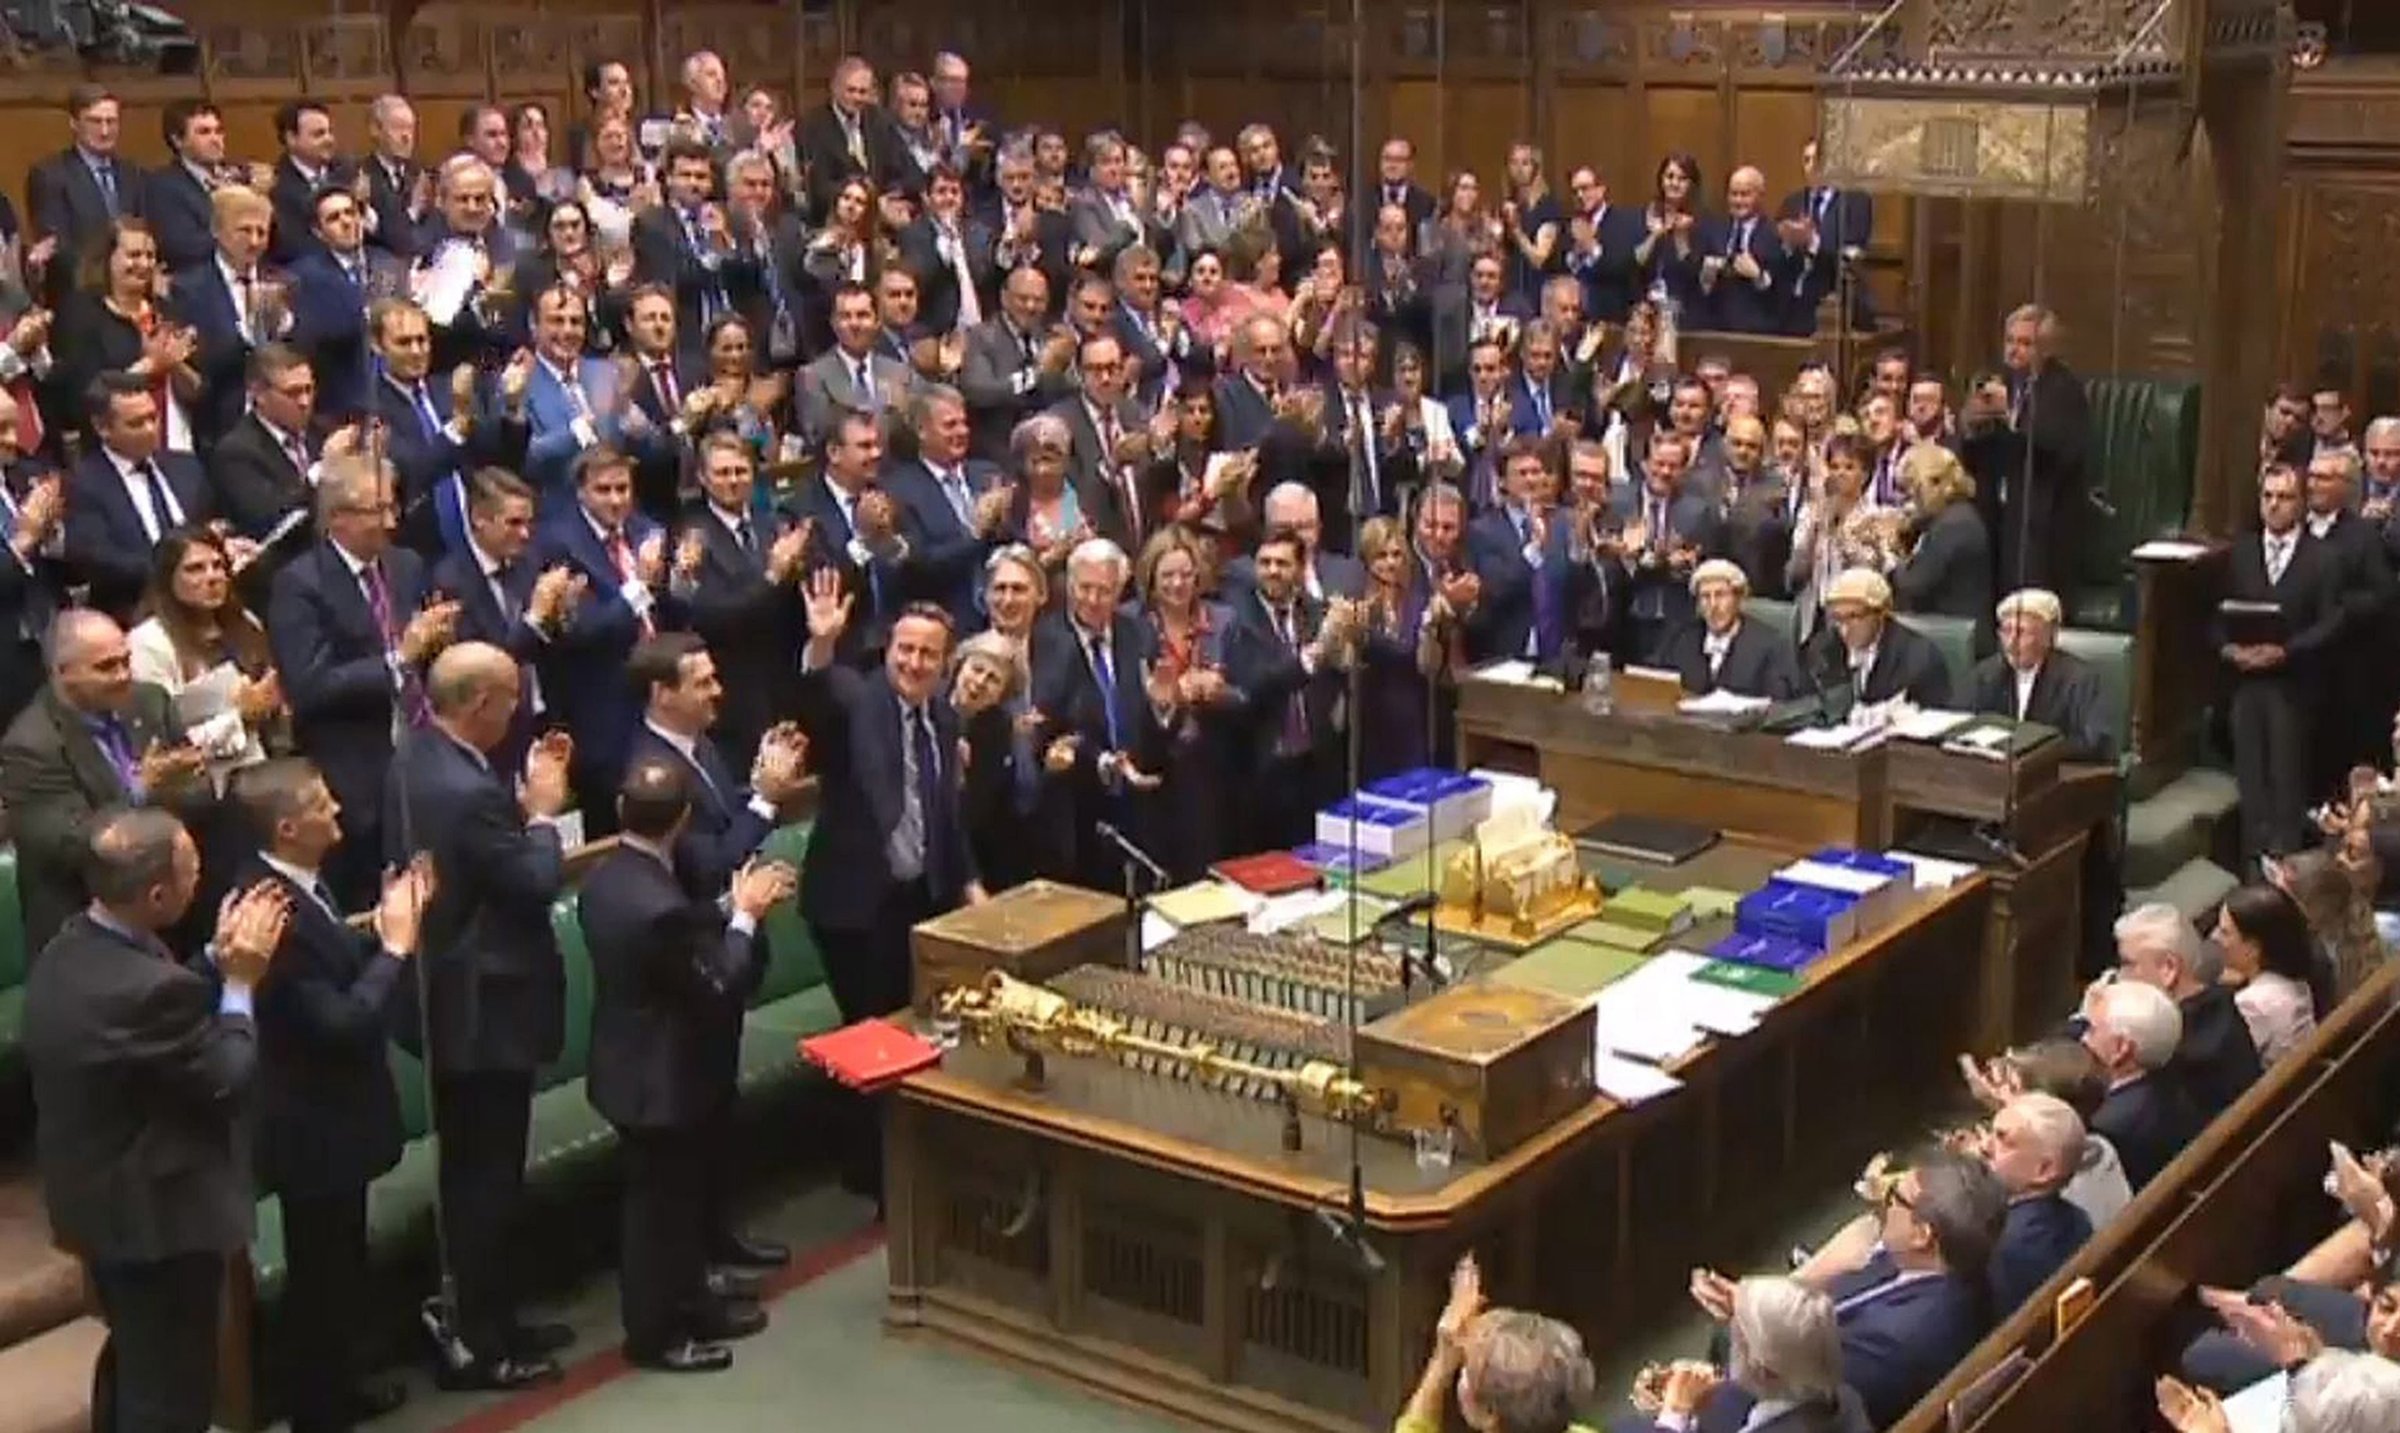 A British Parliament handout photo released shows Conservative Members of Parliament giving outgoing Prime Minister David Cameron a standing ovation after finishing his last Prime Minister's Questions in the House of Commons, in London on July 13, 2016.